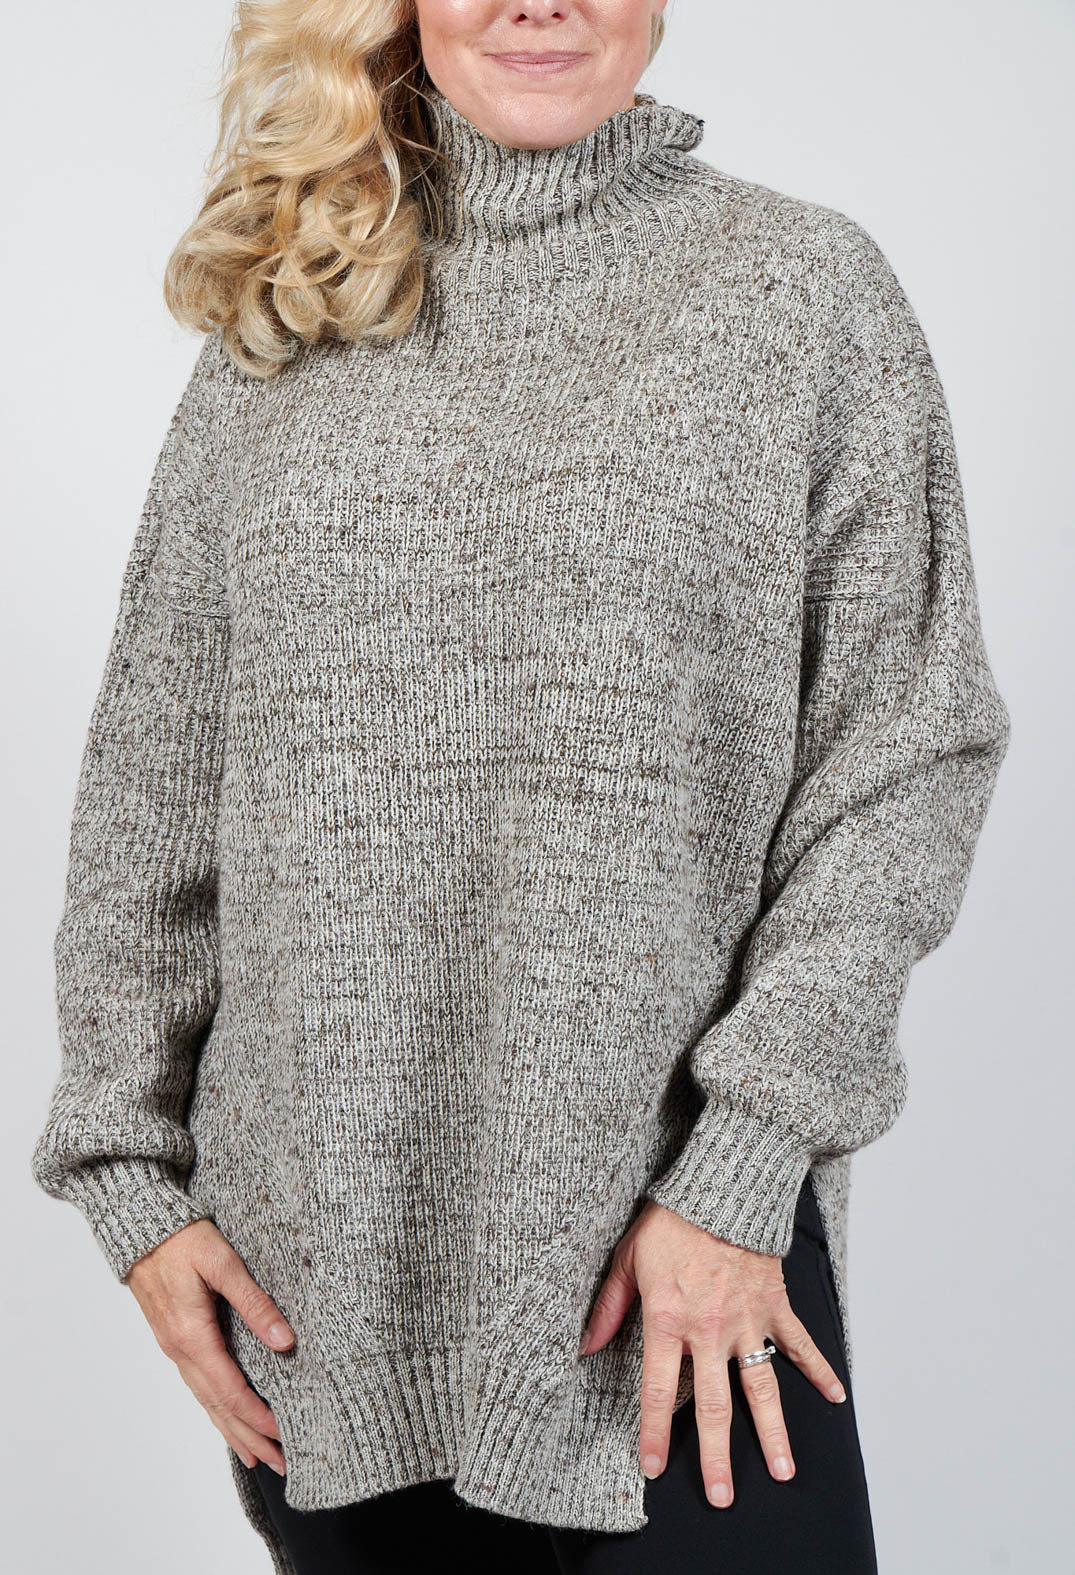 Formio Tricot Knitted Jumper in Multicolour